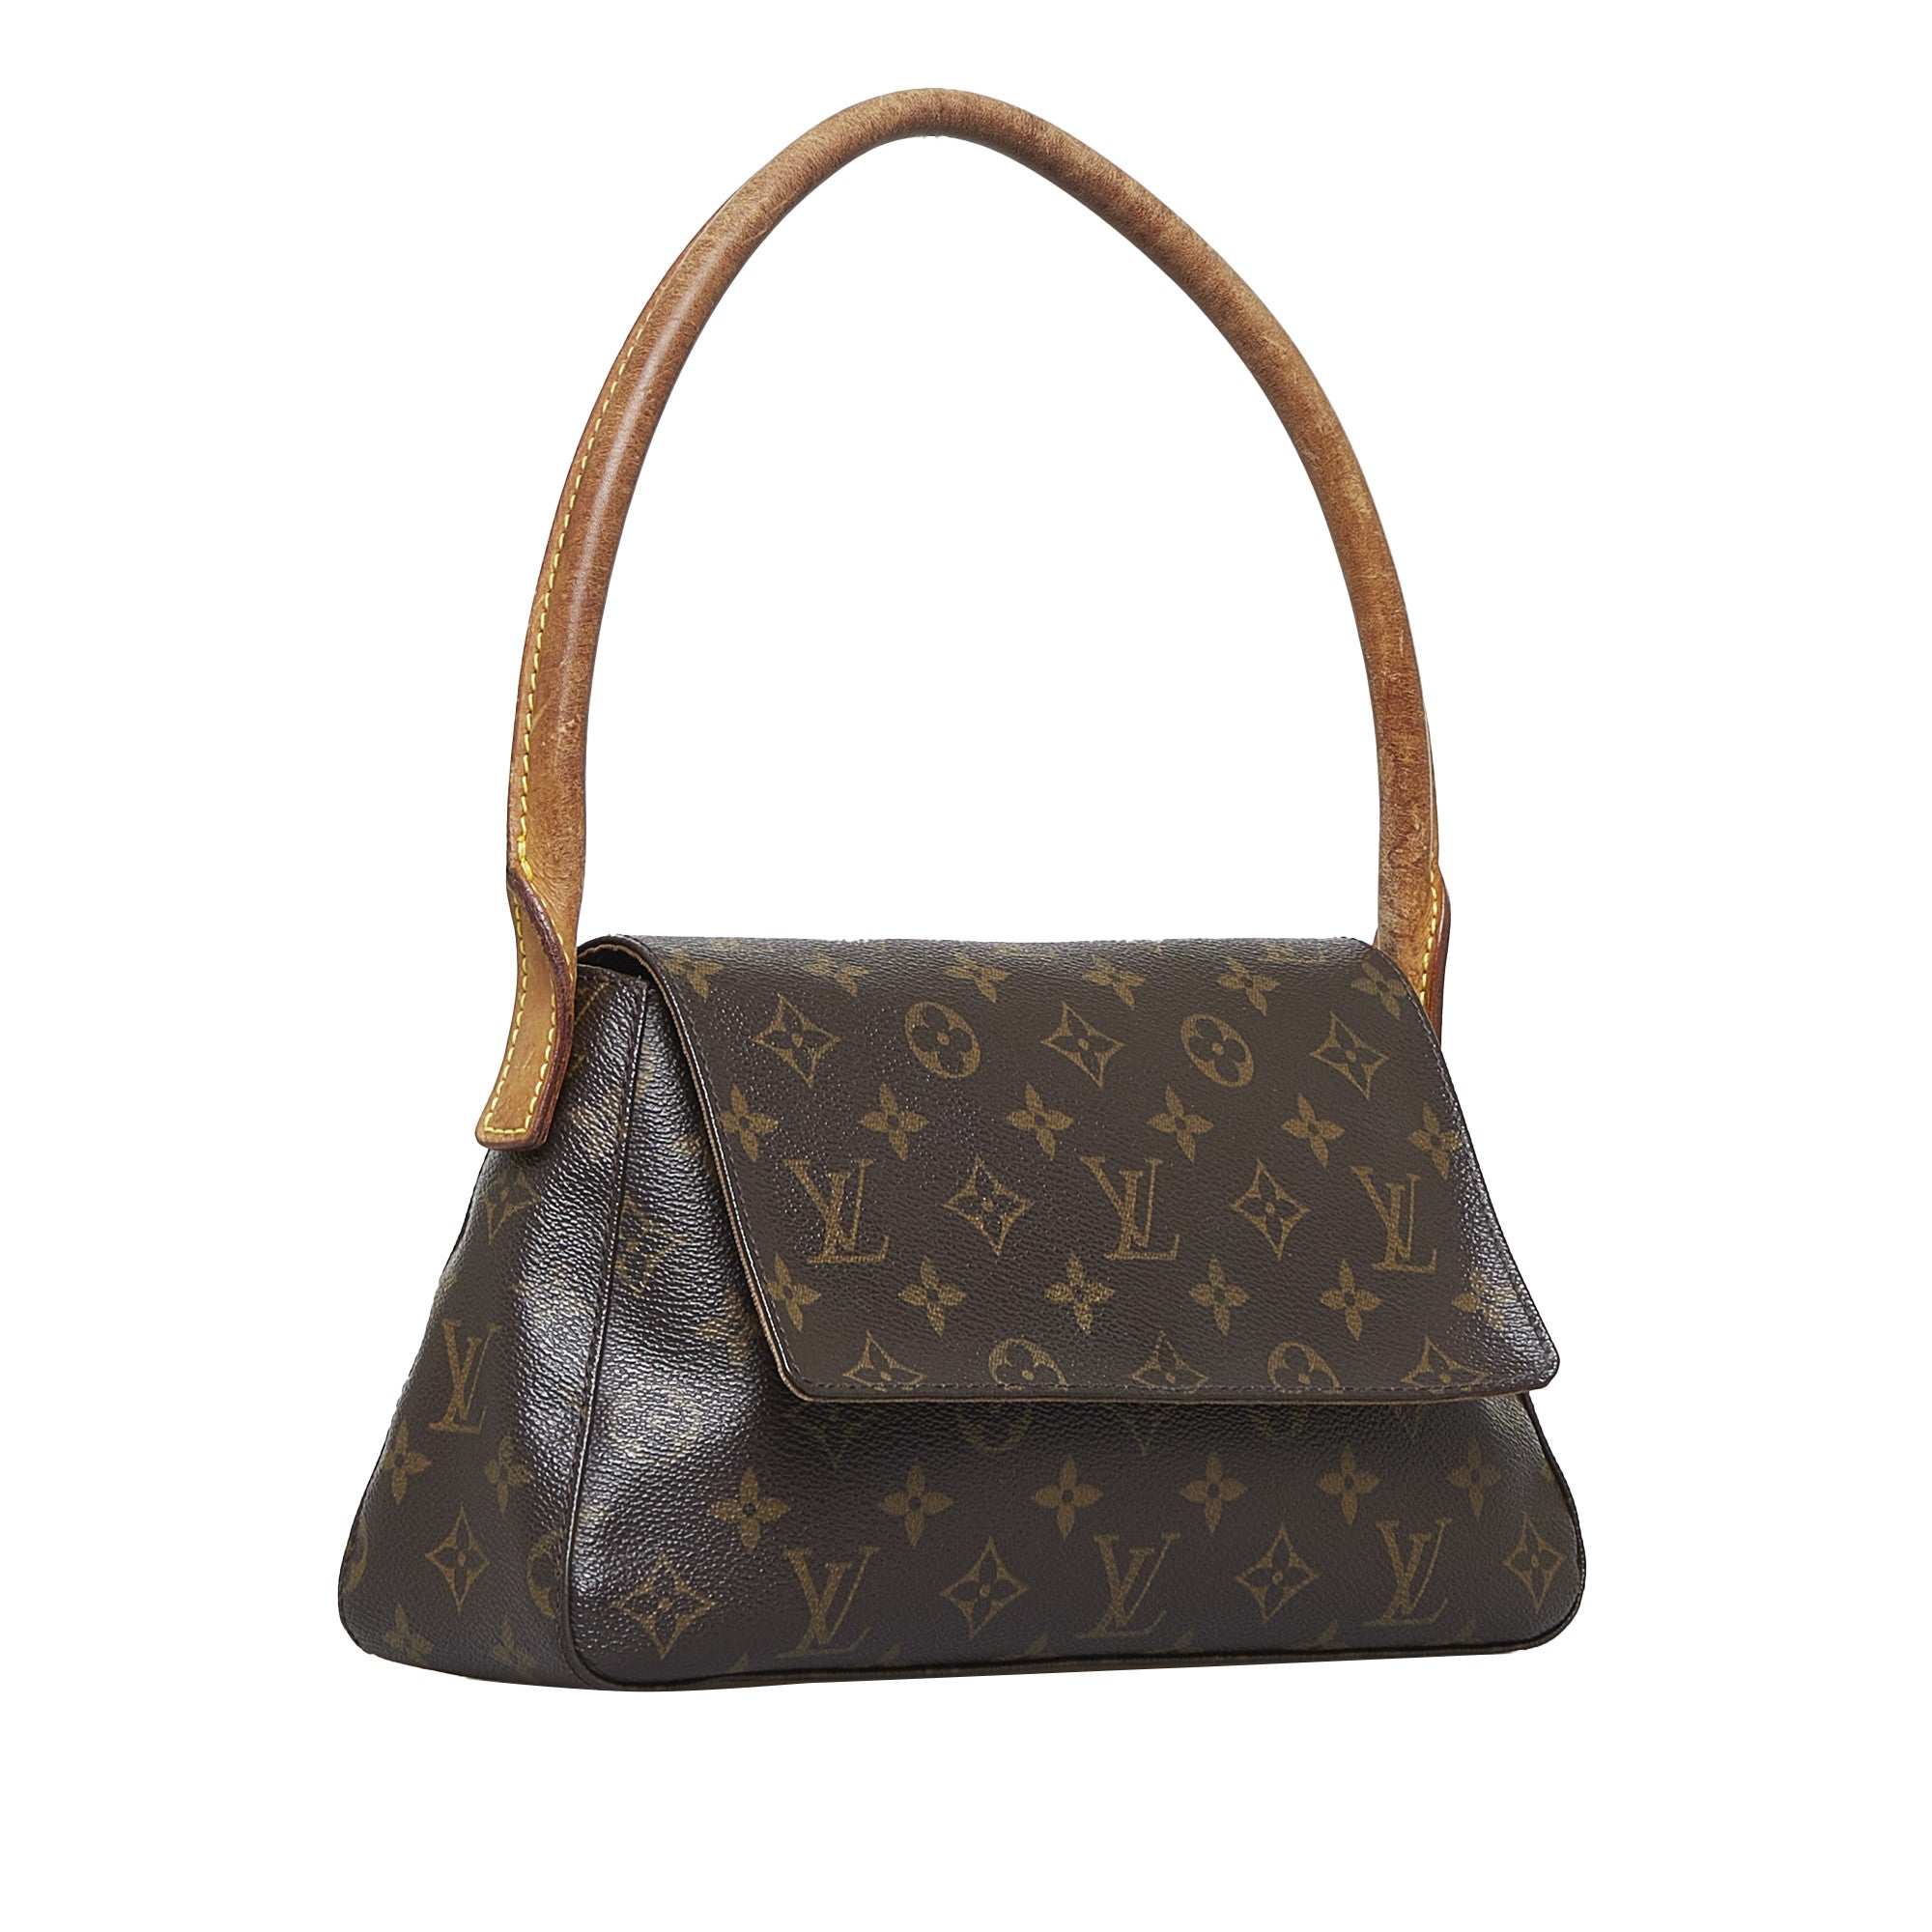 Louis Vuitton Passy Pm Handbag Authenticated By Lxr